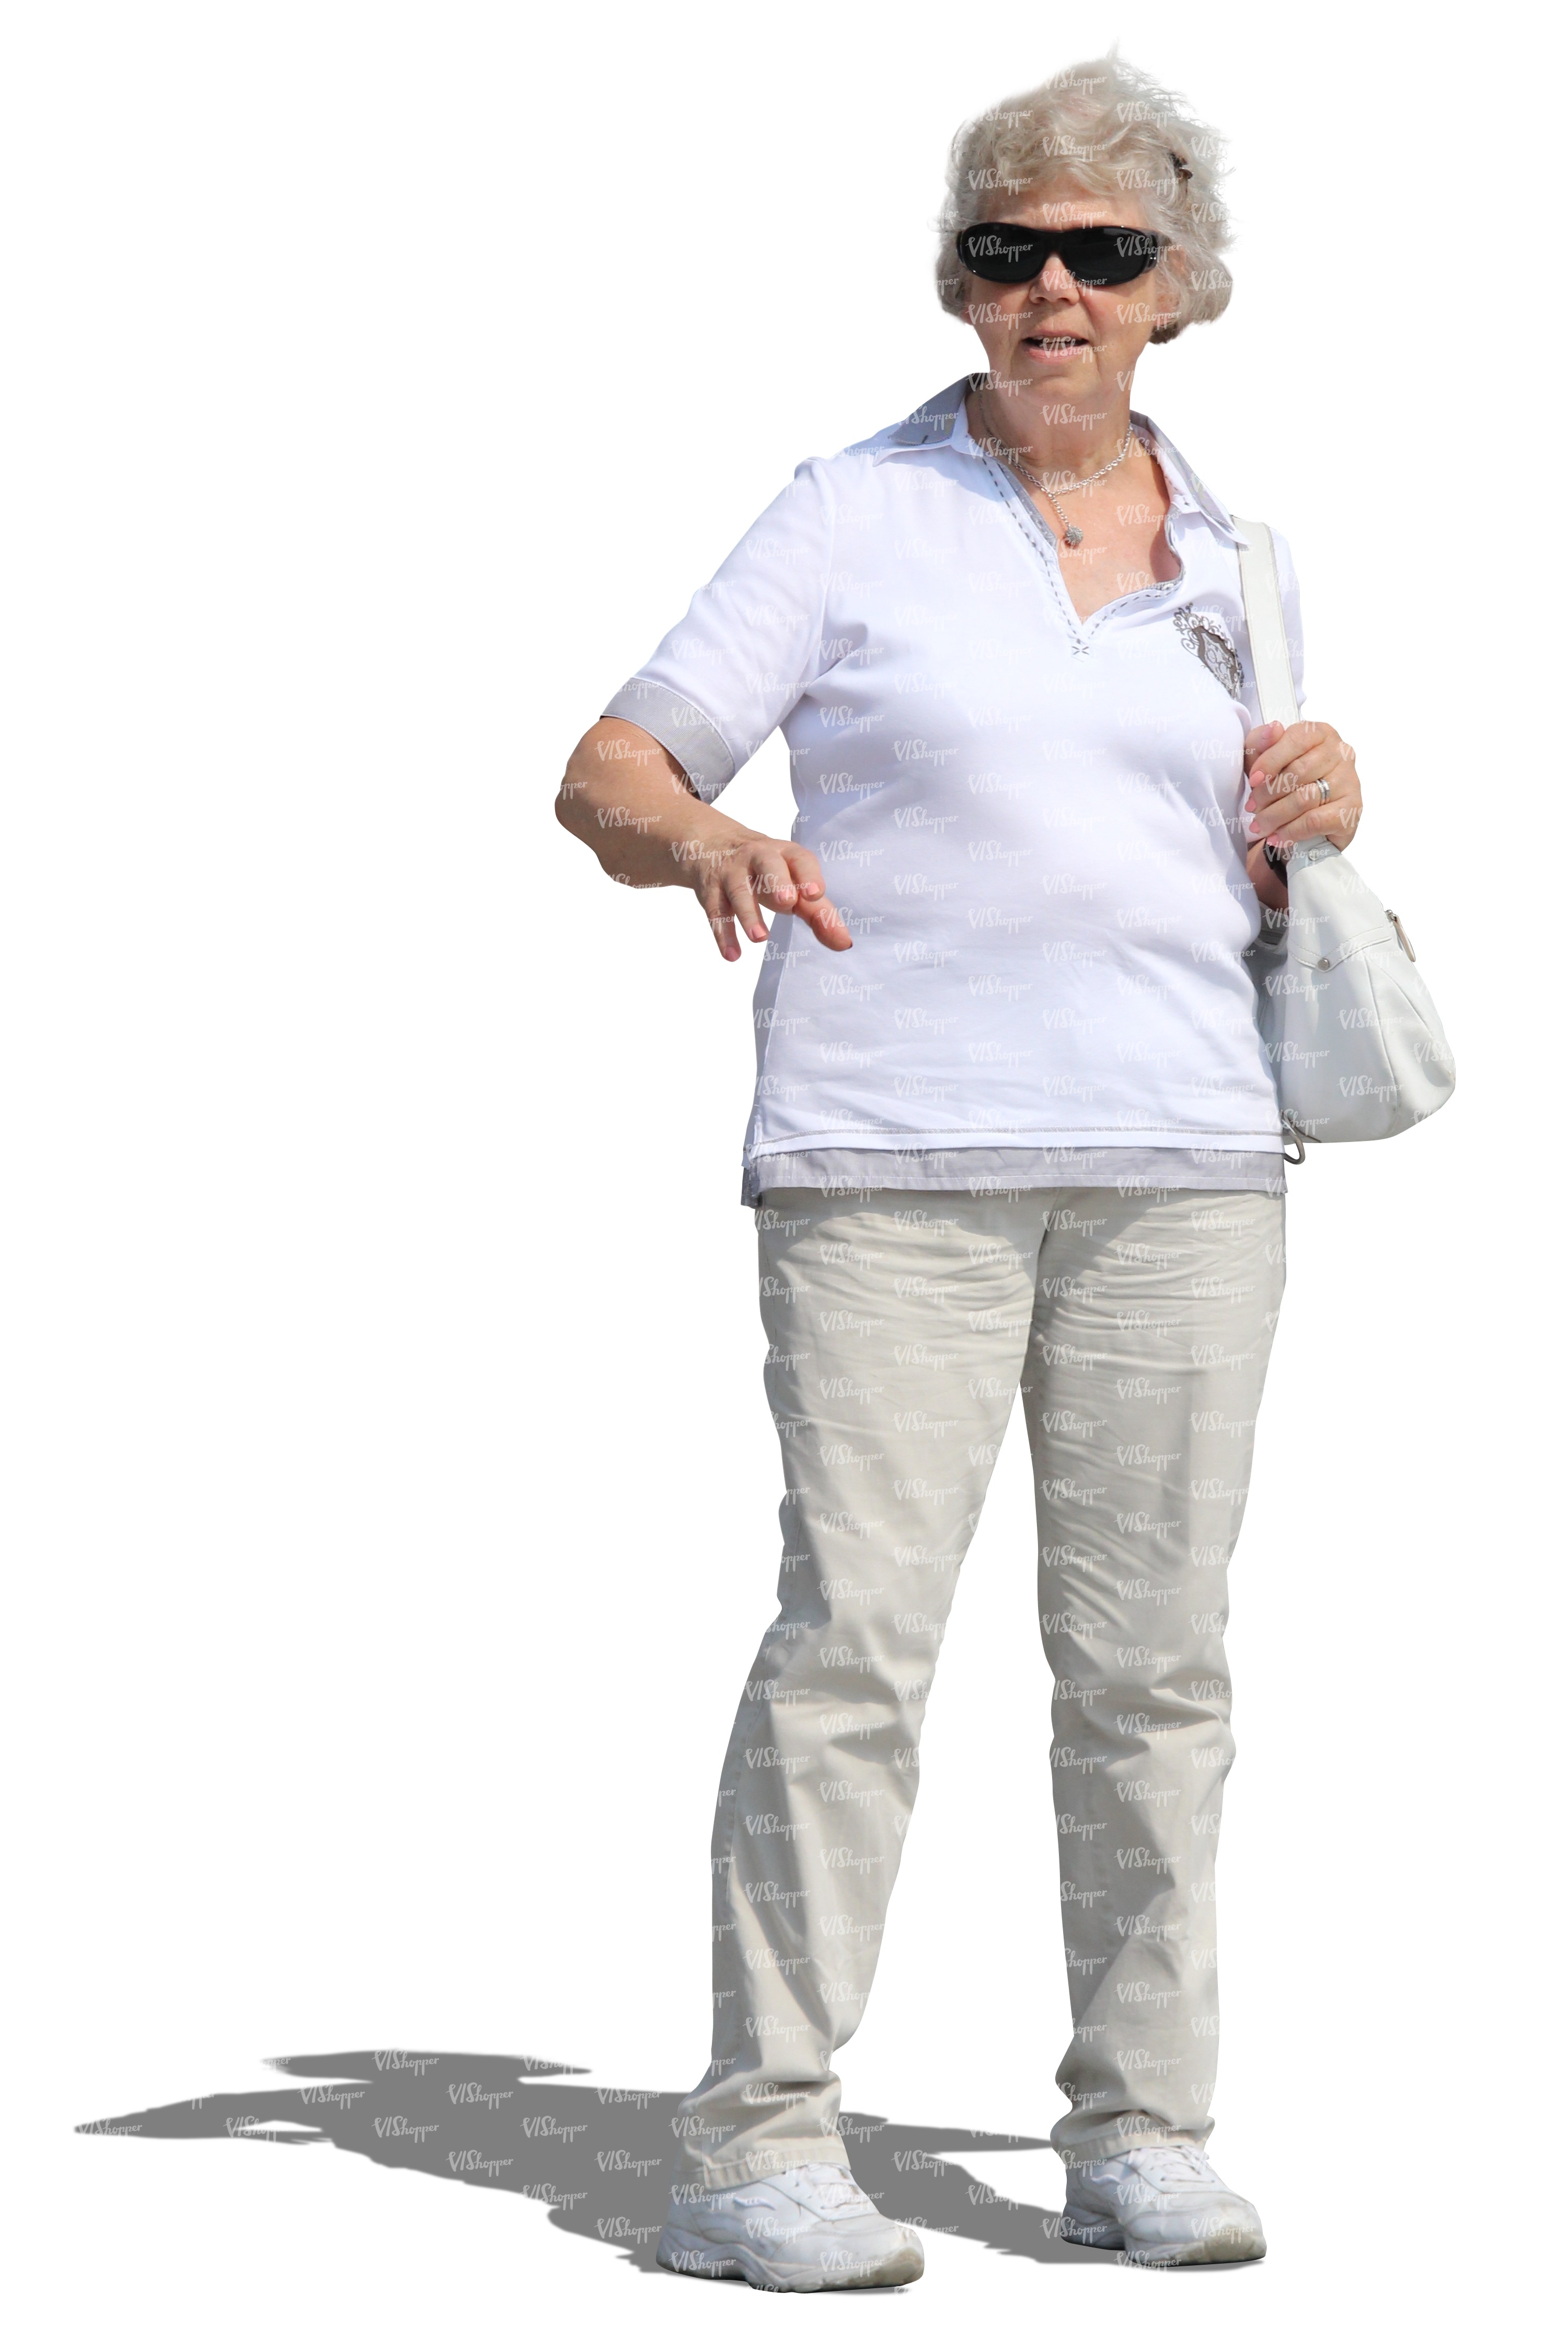 https://www.vishopper.com/images/products/maxxmax/PE/6278_elderly-woman-in-a-white-outfit-standing.jpg